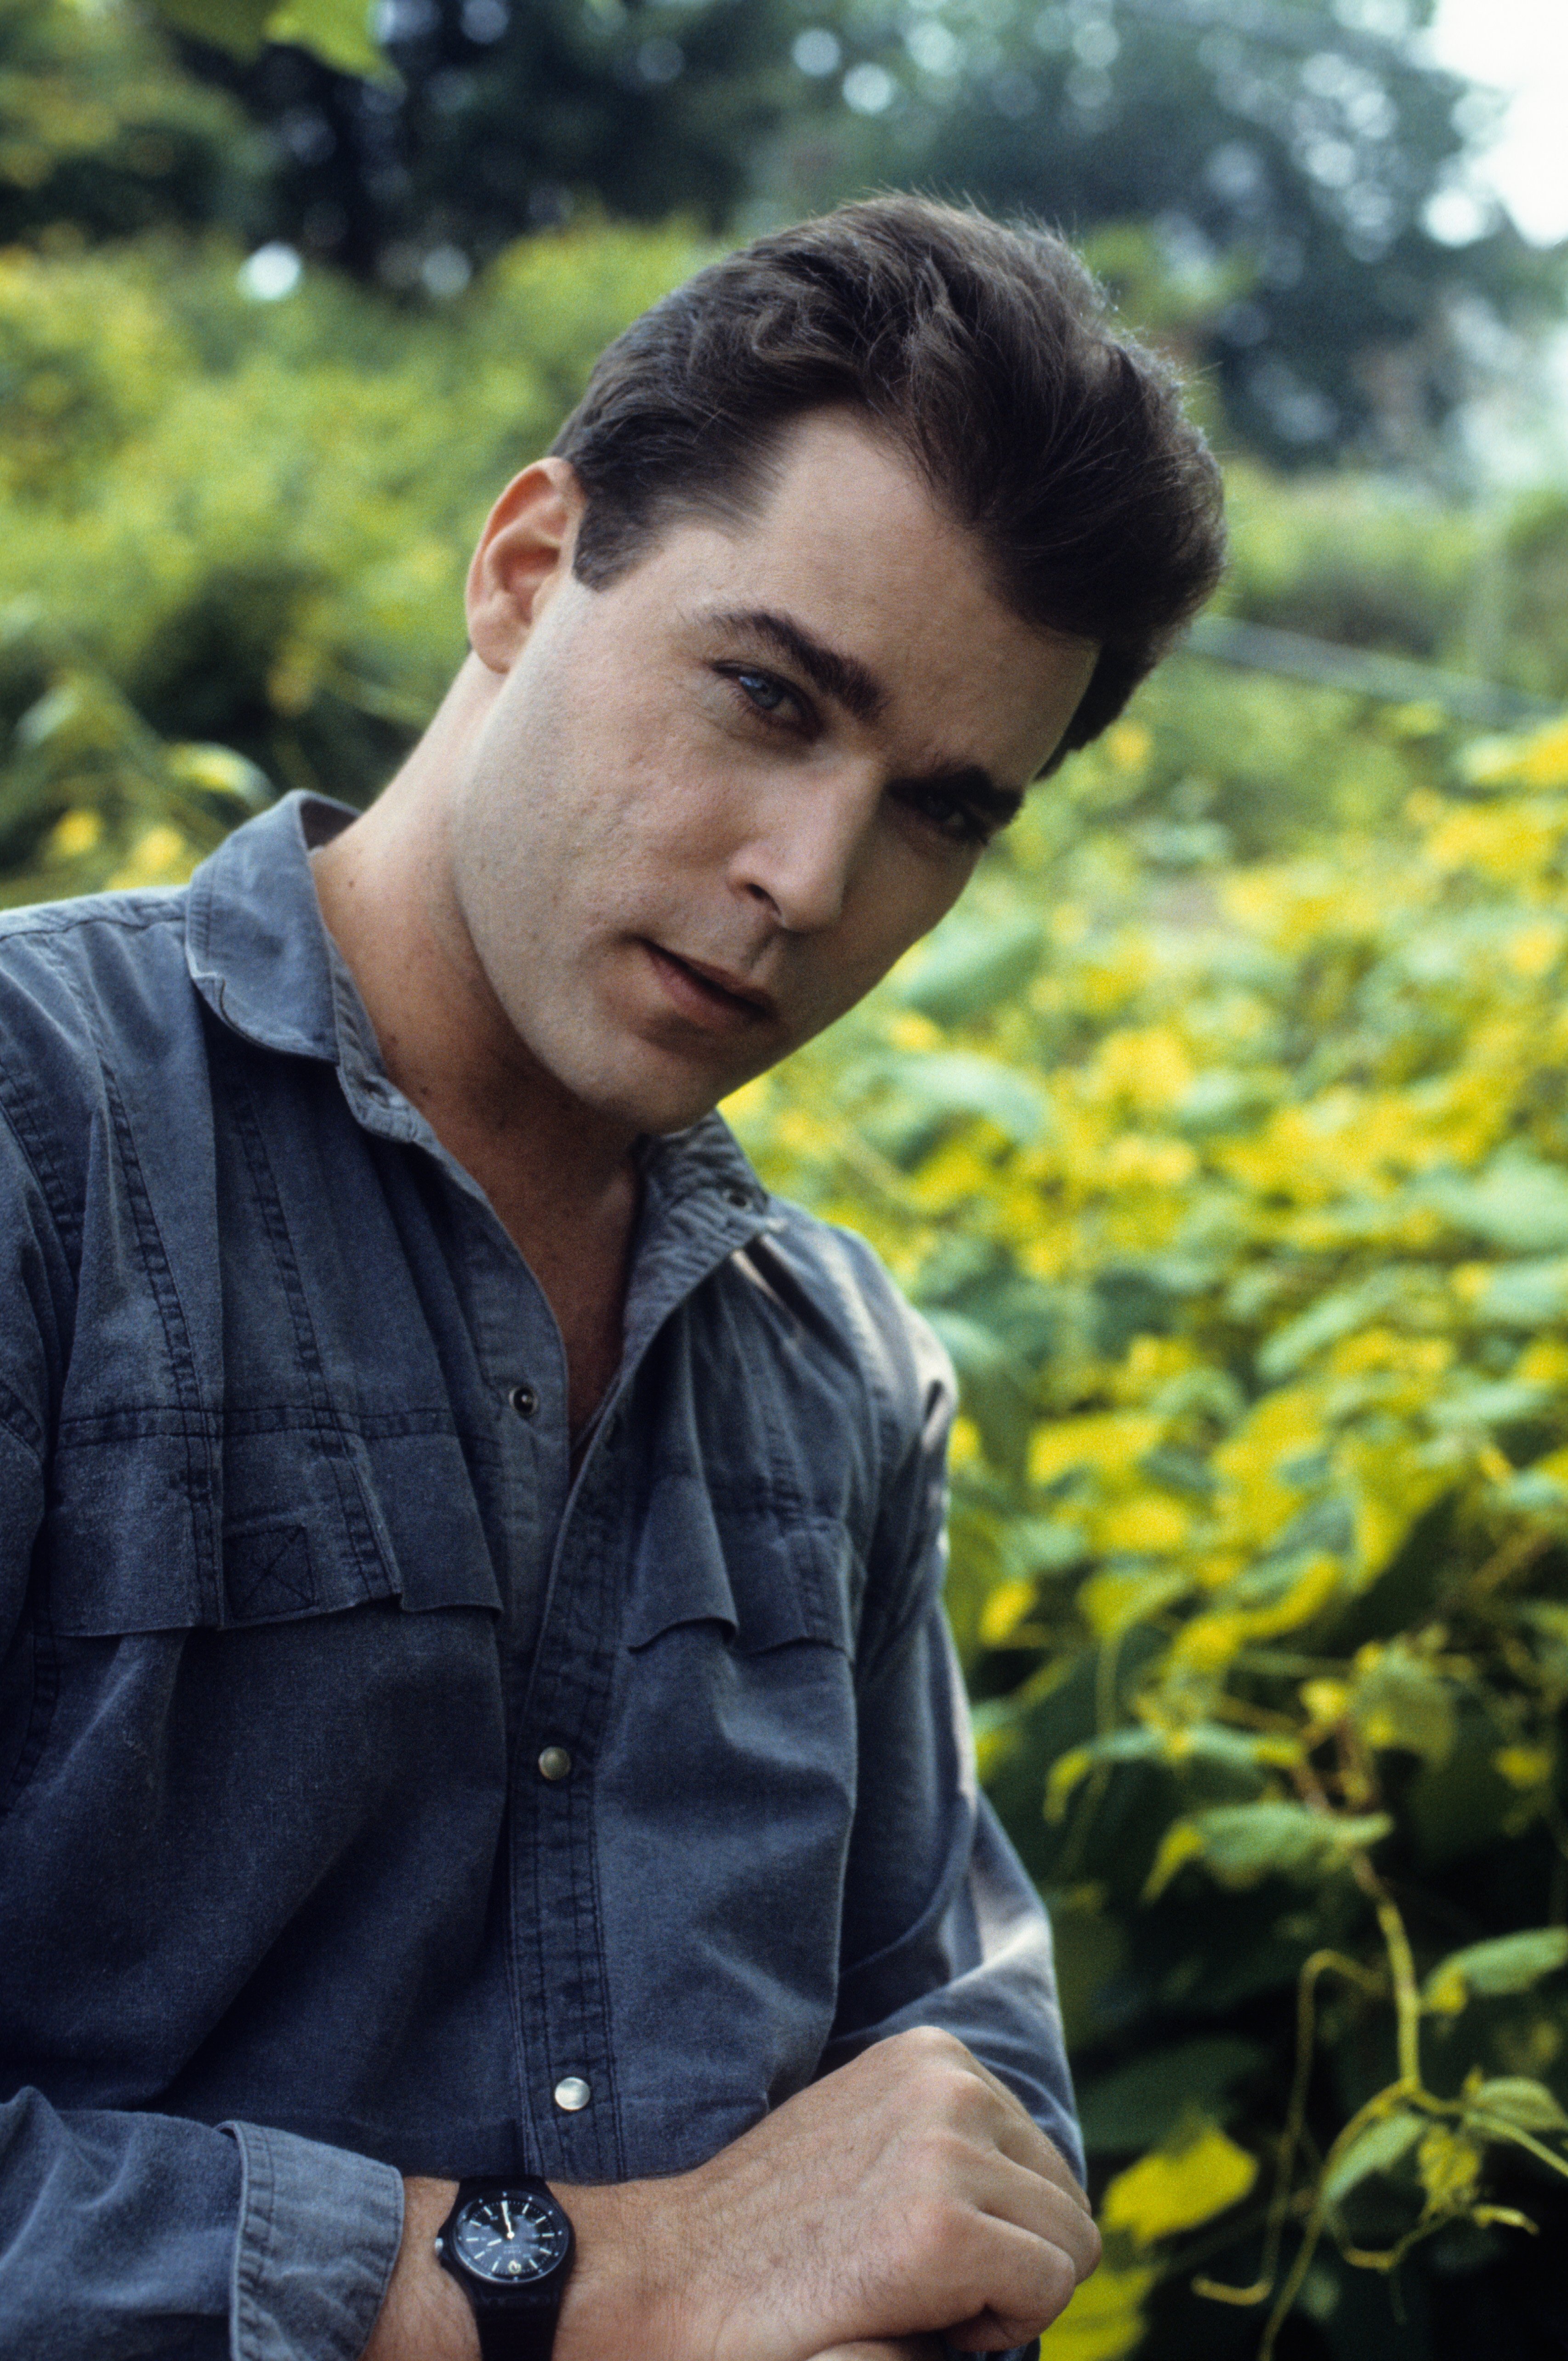 Ray Liotta in a scene from the film "Dominick and Eugene," circa 1988. | Source: Orion Pictures/Getty Images